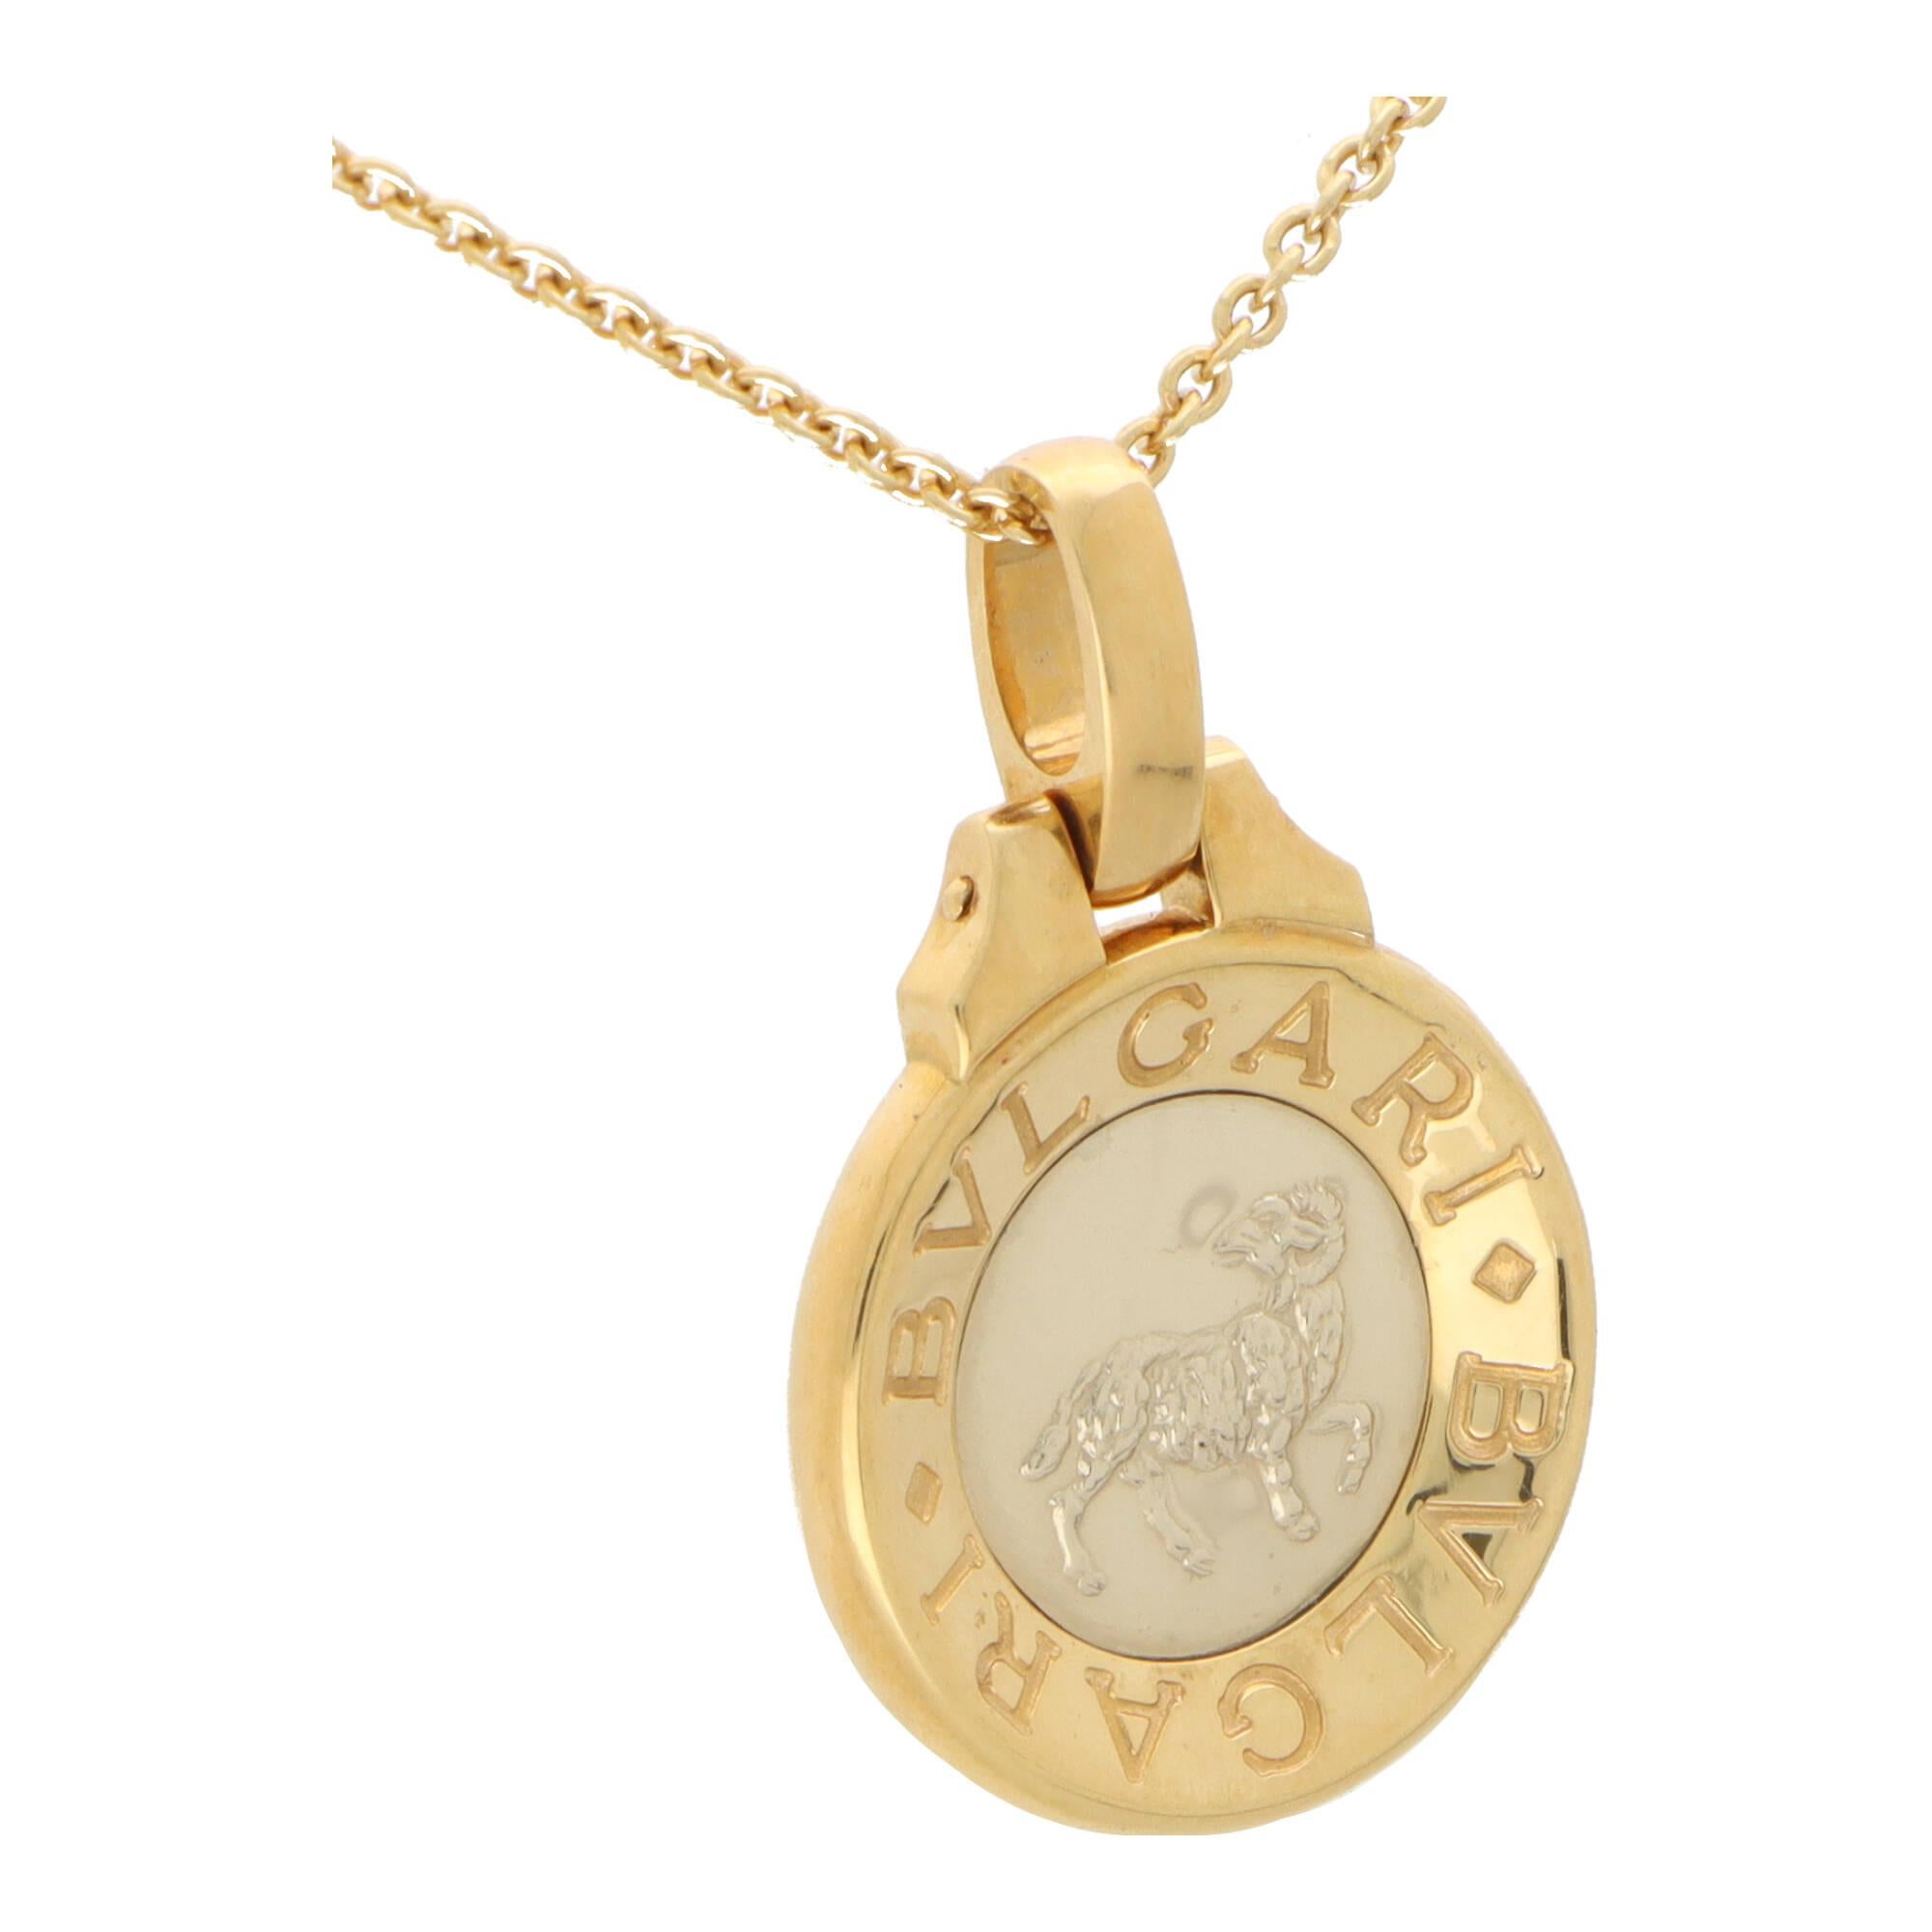 A stylish vintage Buvgari Aries Zodiac pendant in 18k yellow gold and stainless steel.

The piece is firstly composed of a circular medallion which is set to the centre with stainless steel panel. Engraved in the stainless steel is a lion,